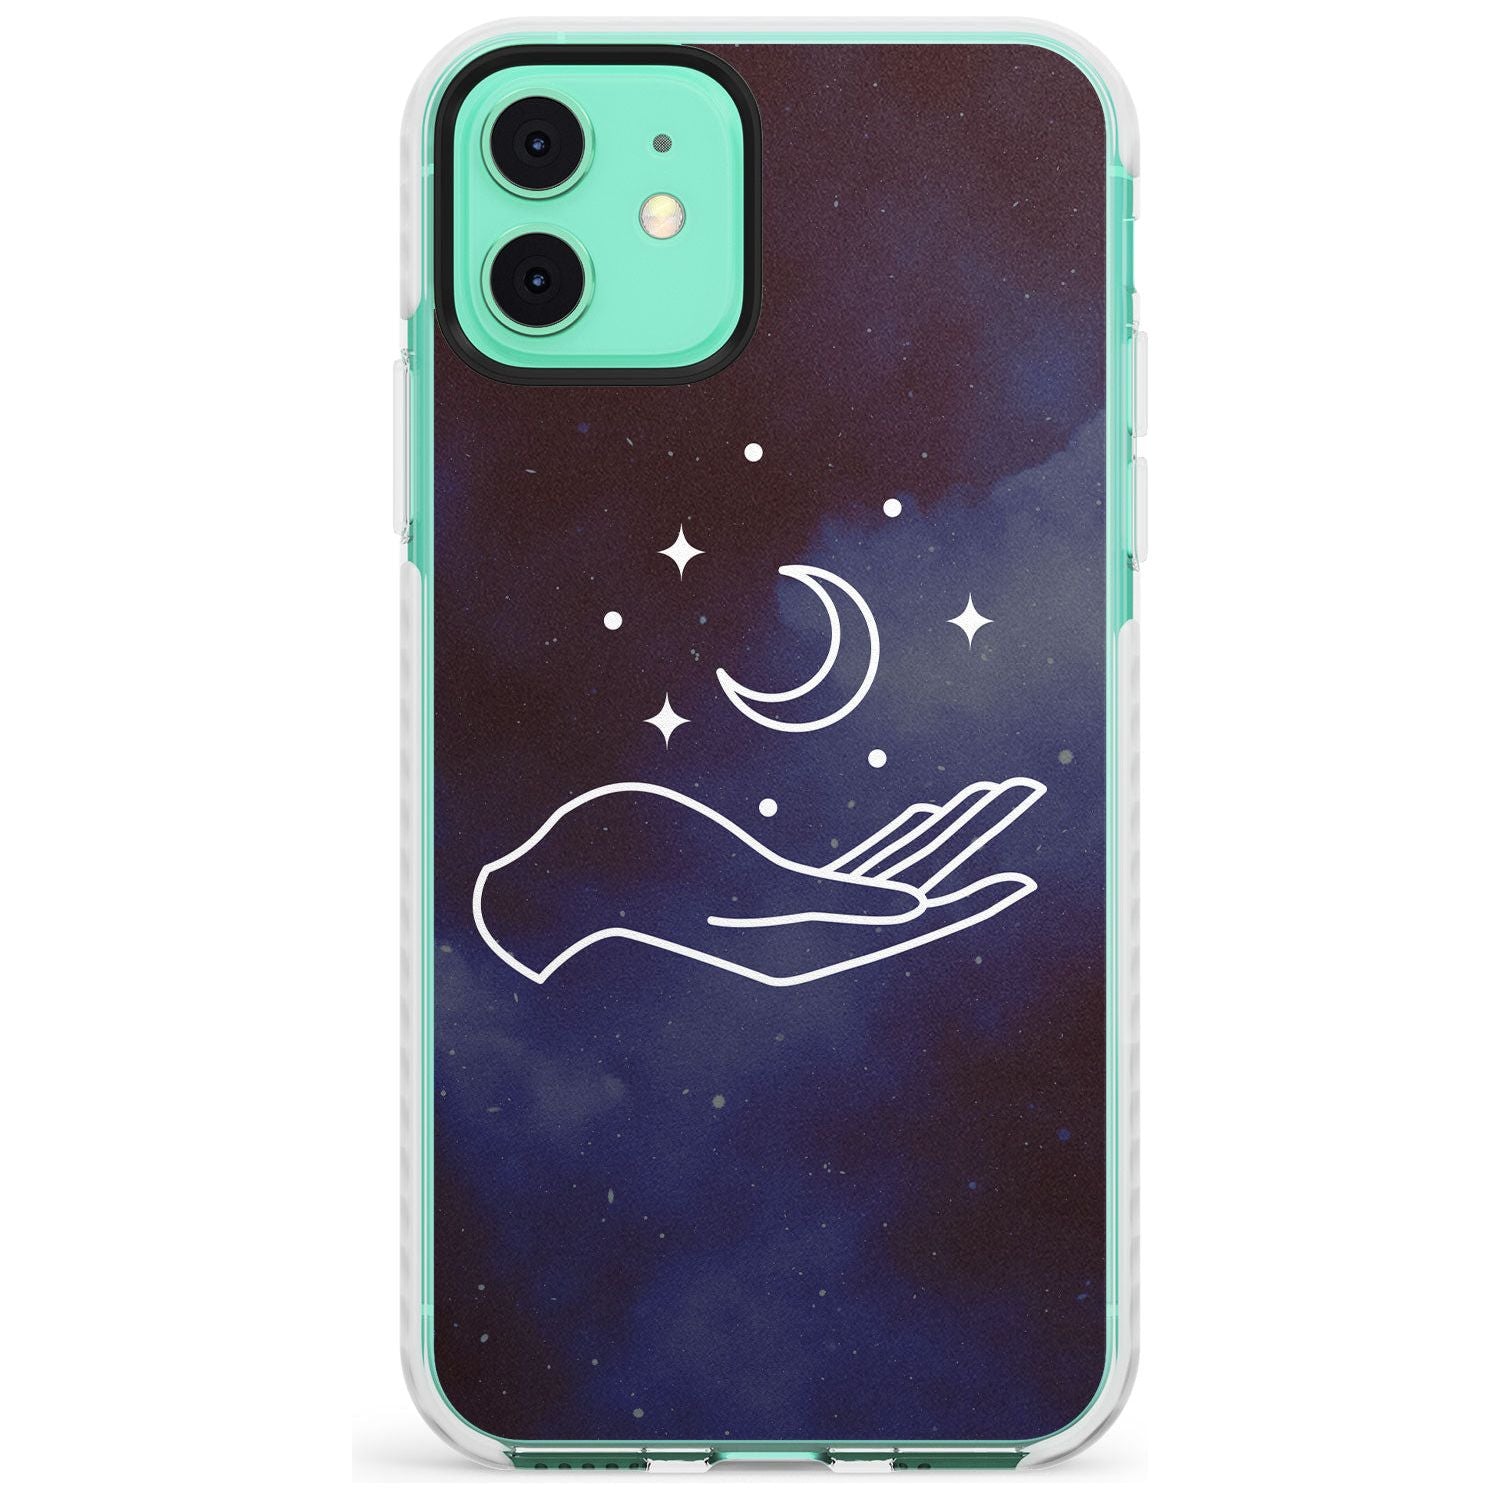 Floating Moon Above Hand Slim TPU Phone Case for iPhone 11